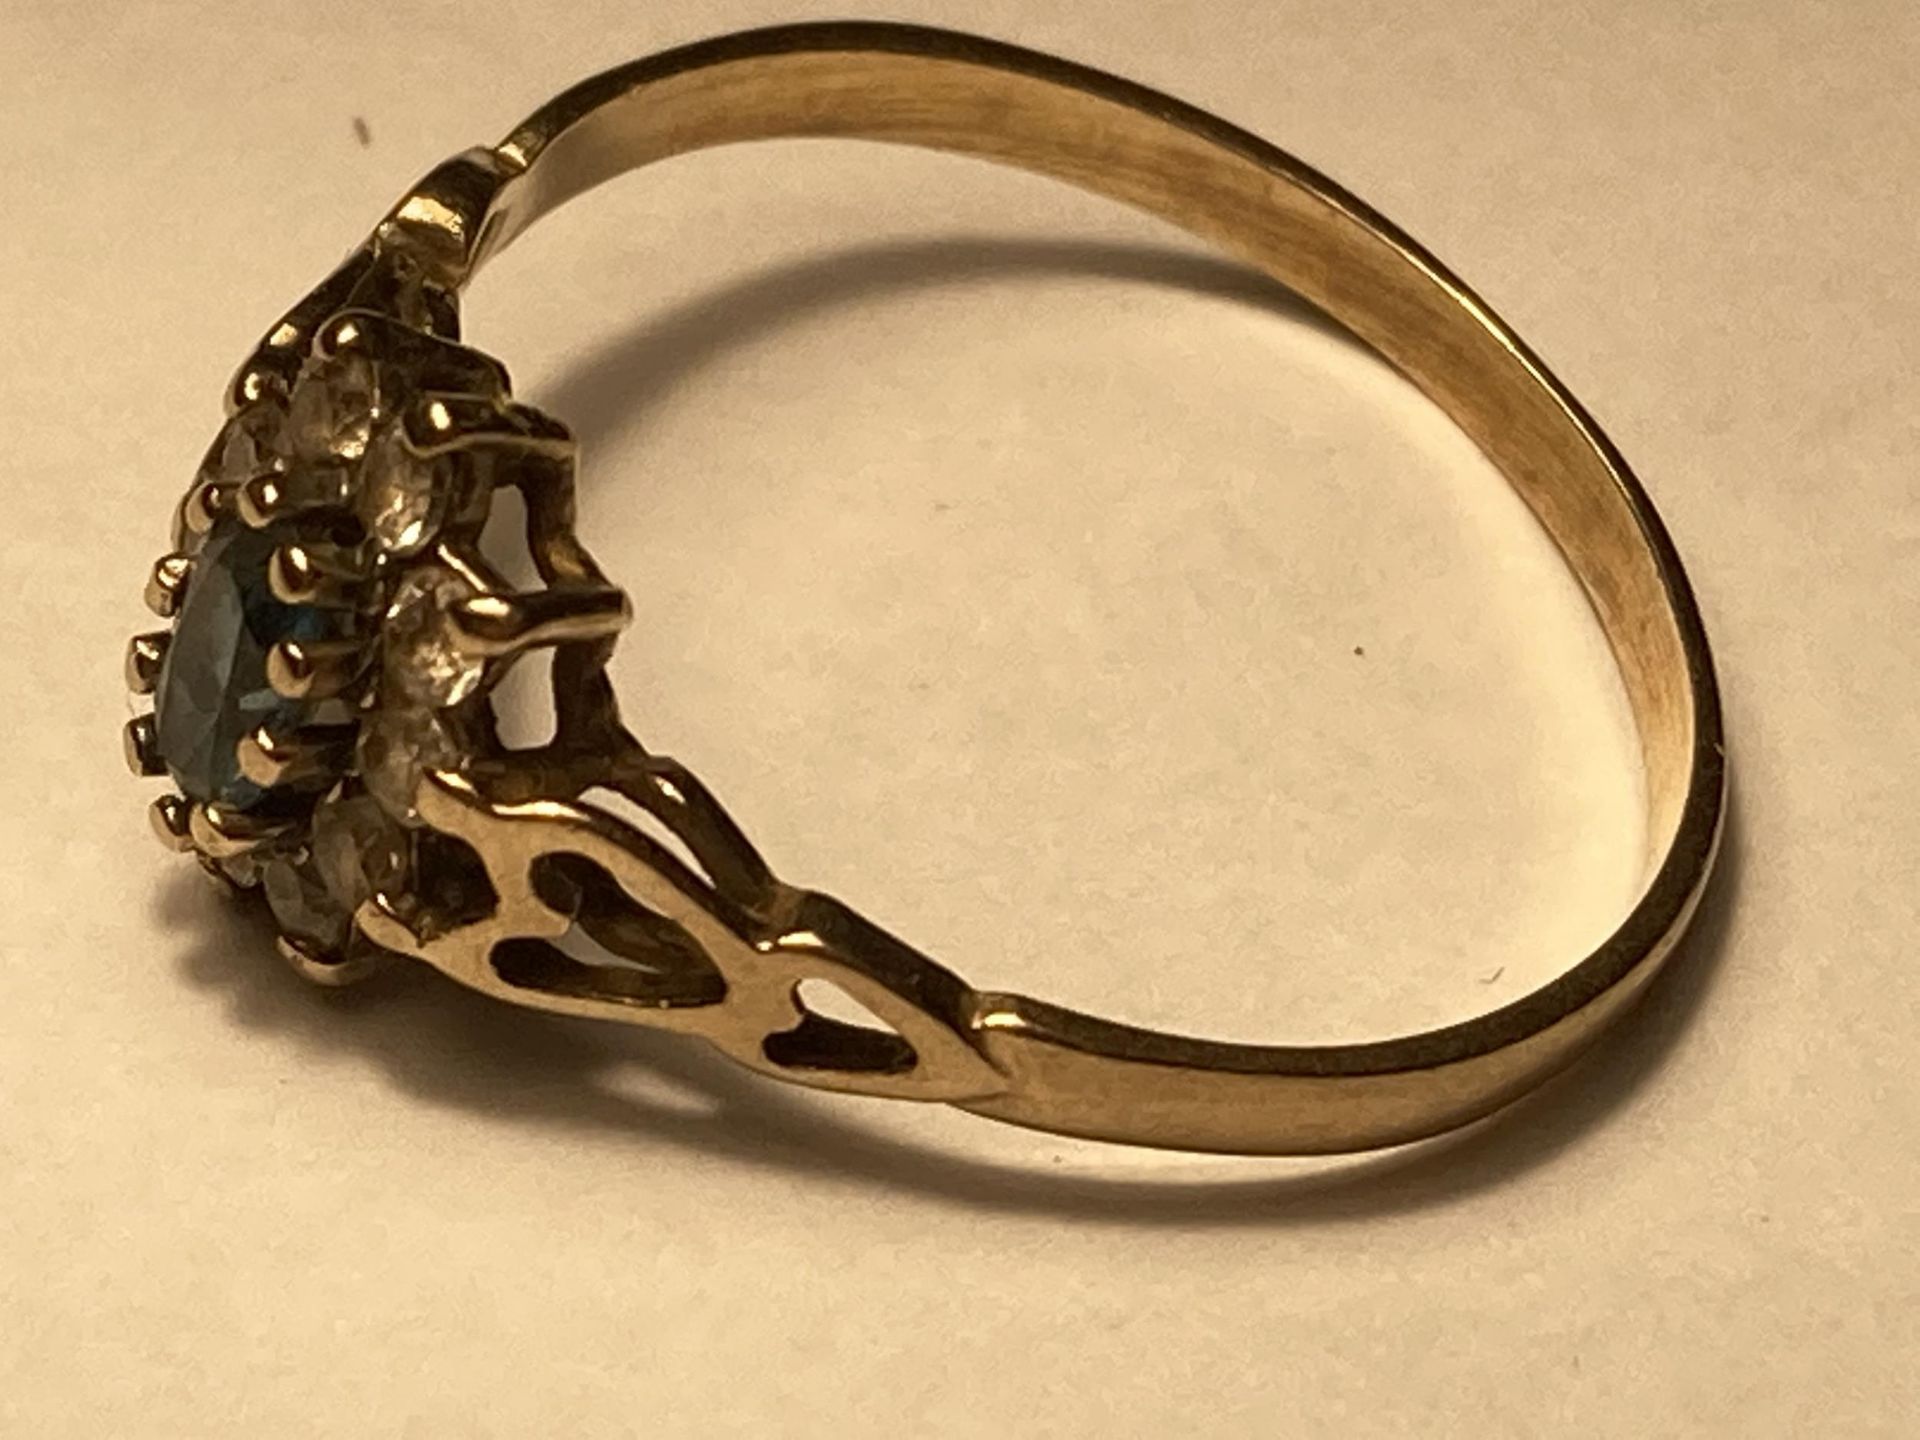 A 9 CARAT GOLD RING WITH A CENTRE BLUE TOPAZ STONE SURROUNDED BY CUBIC ZIRCONIAS SIZE O/P - Image 2 of 3